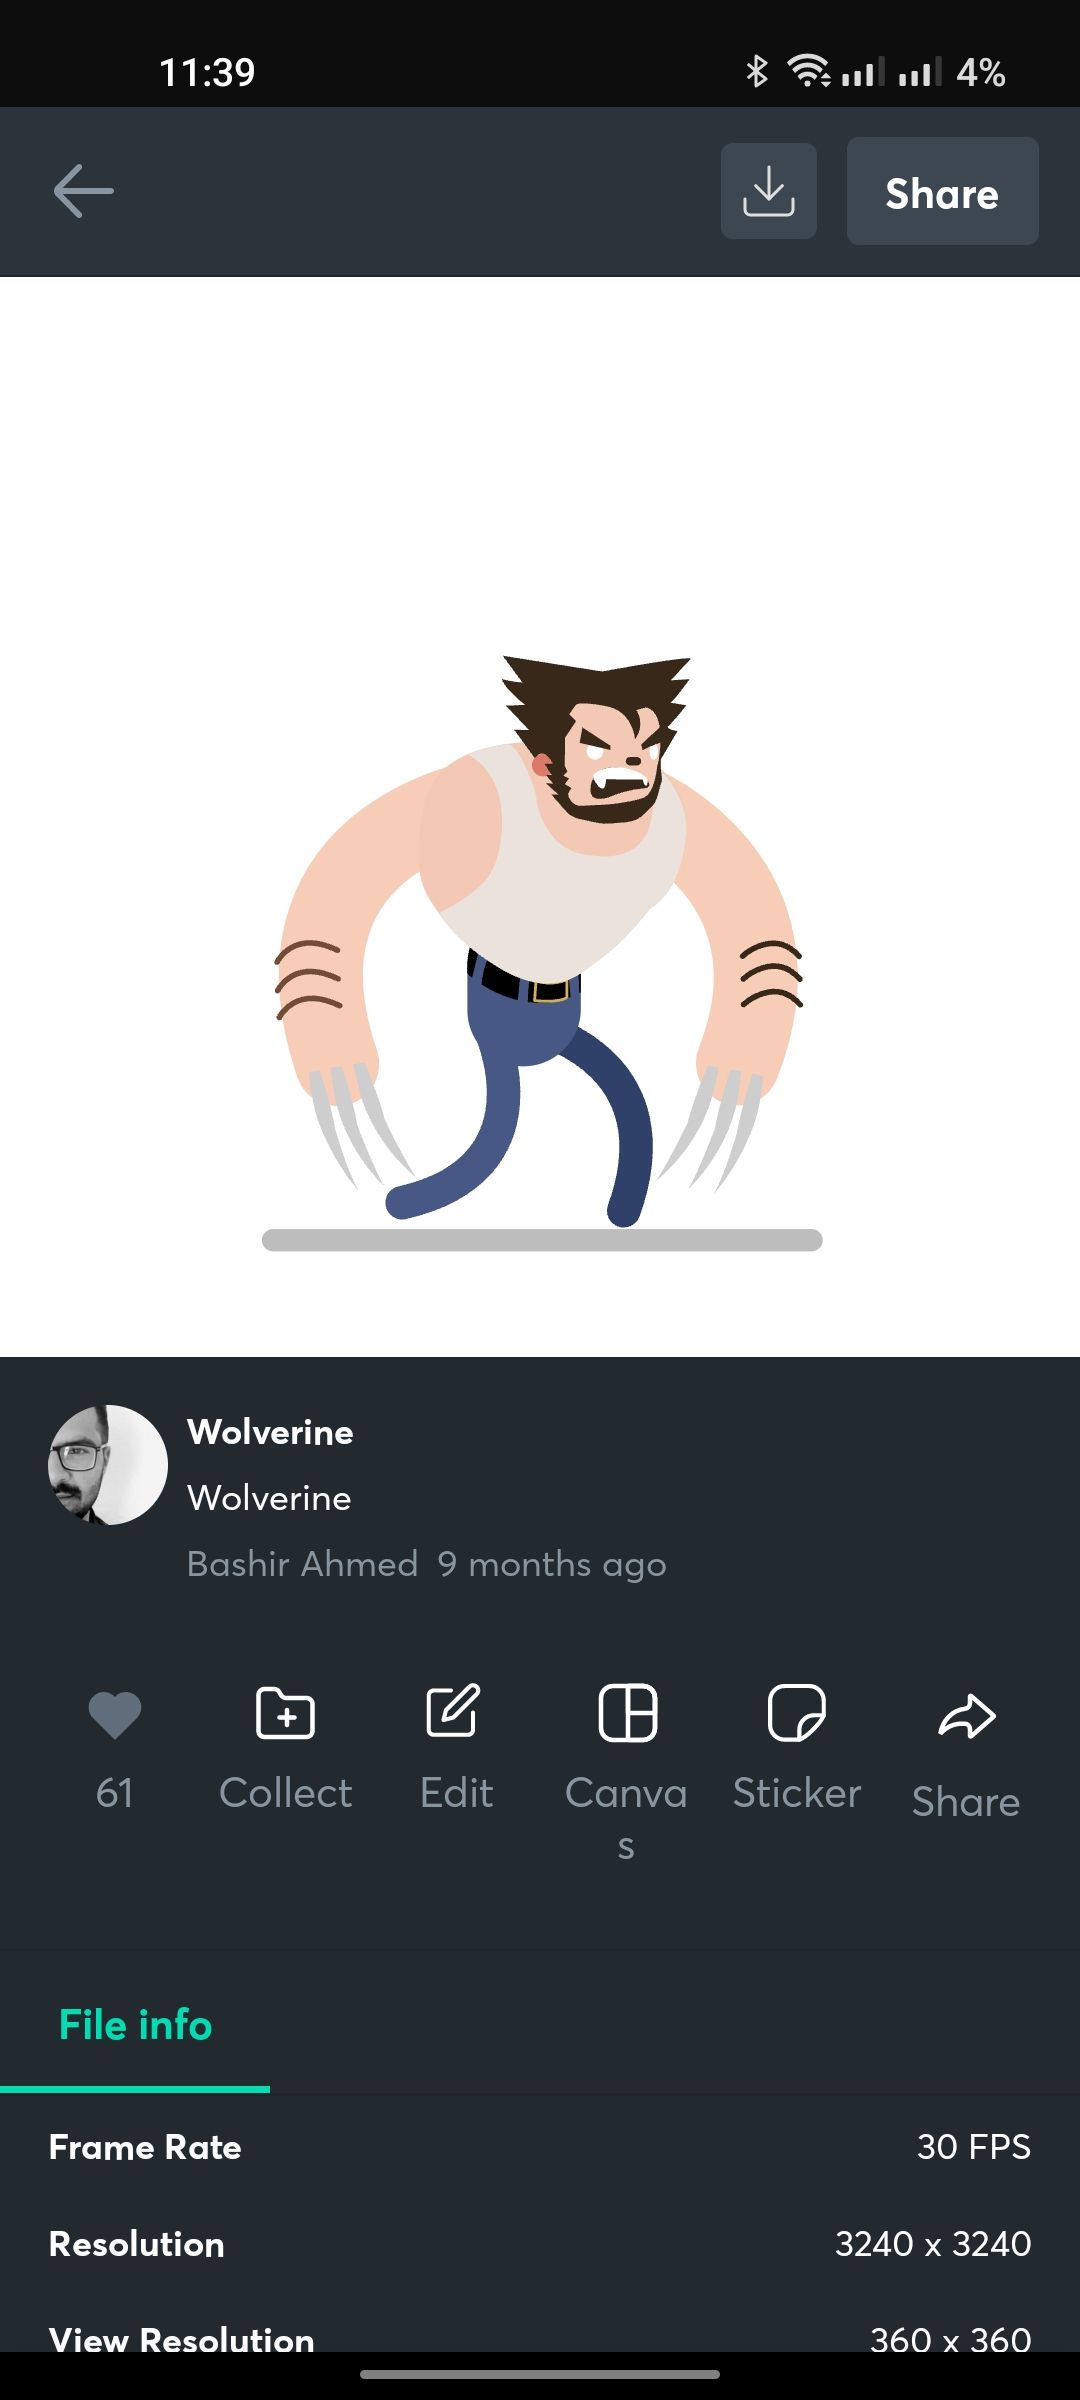 Wolverine animation with options to save, edit, and share